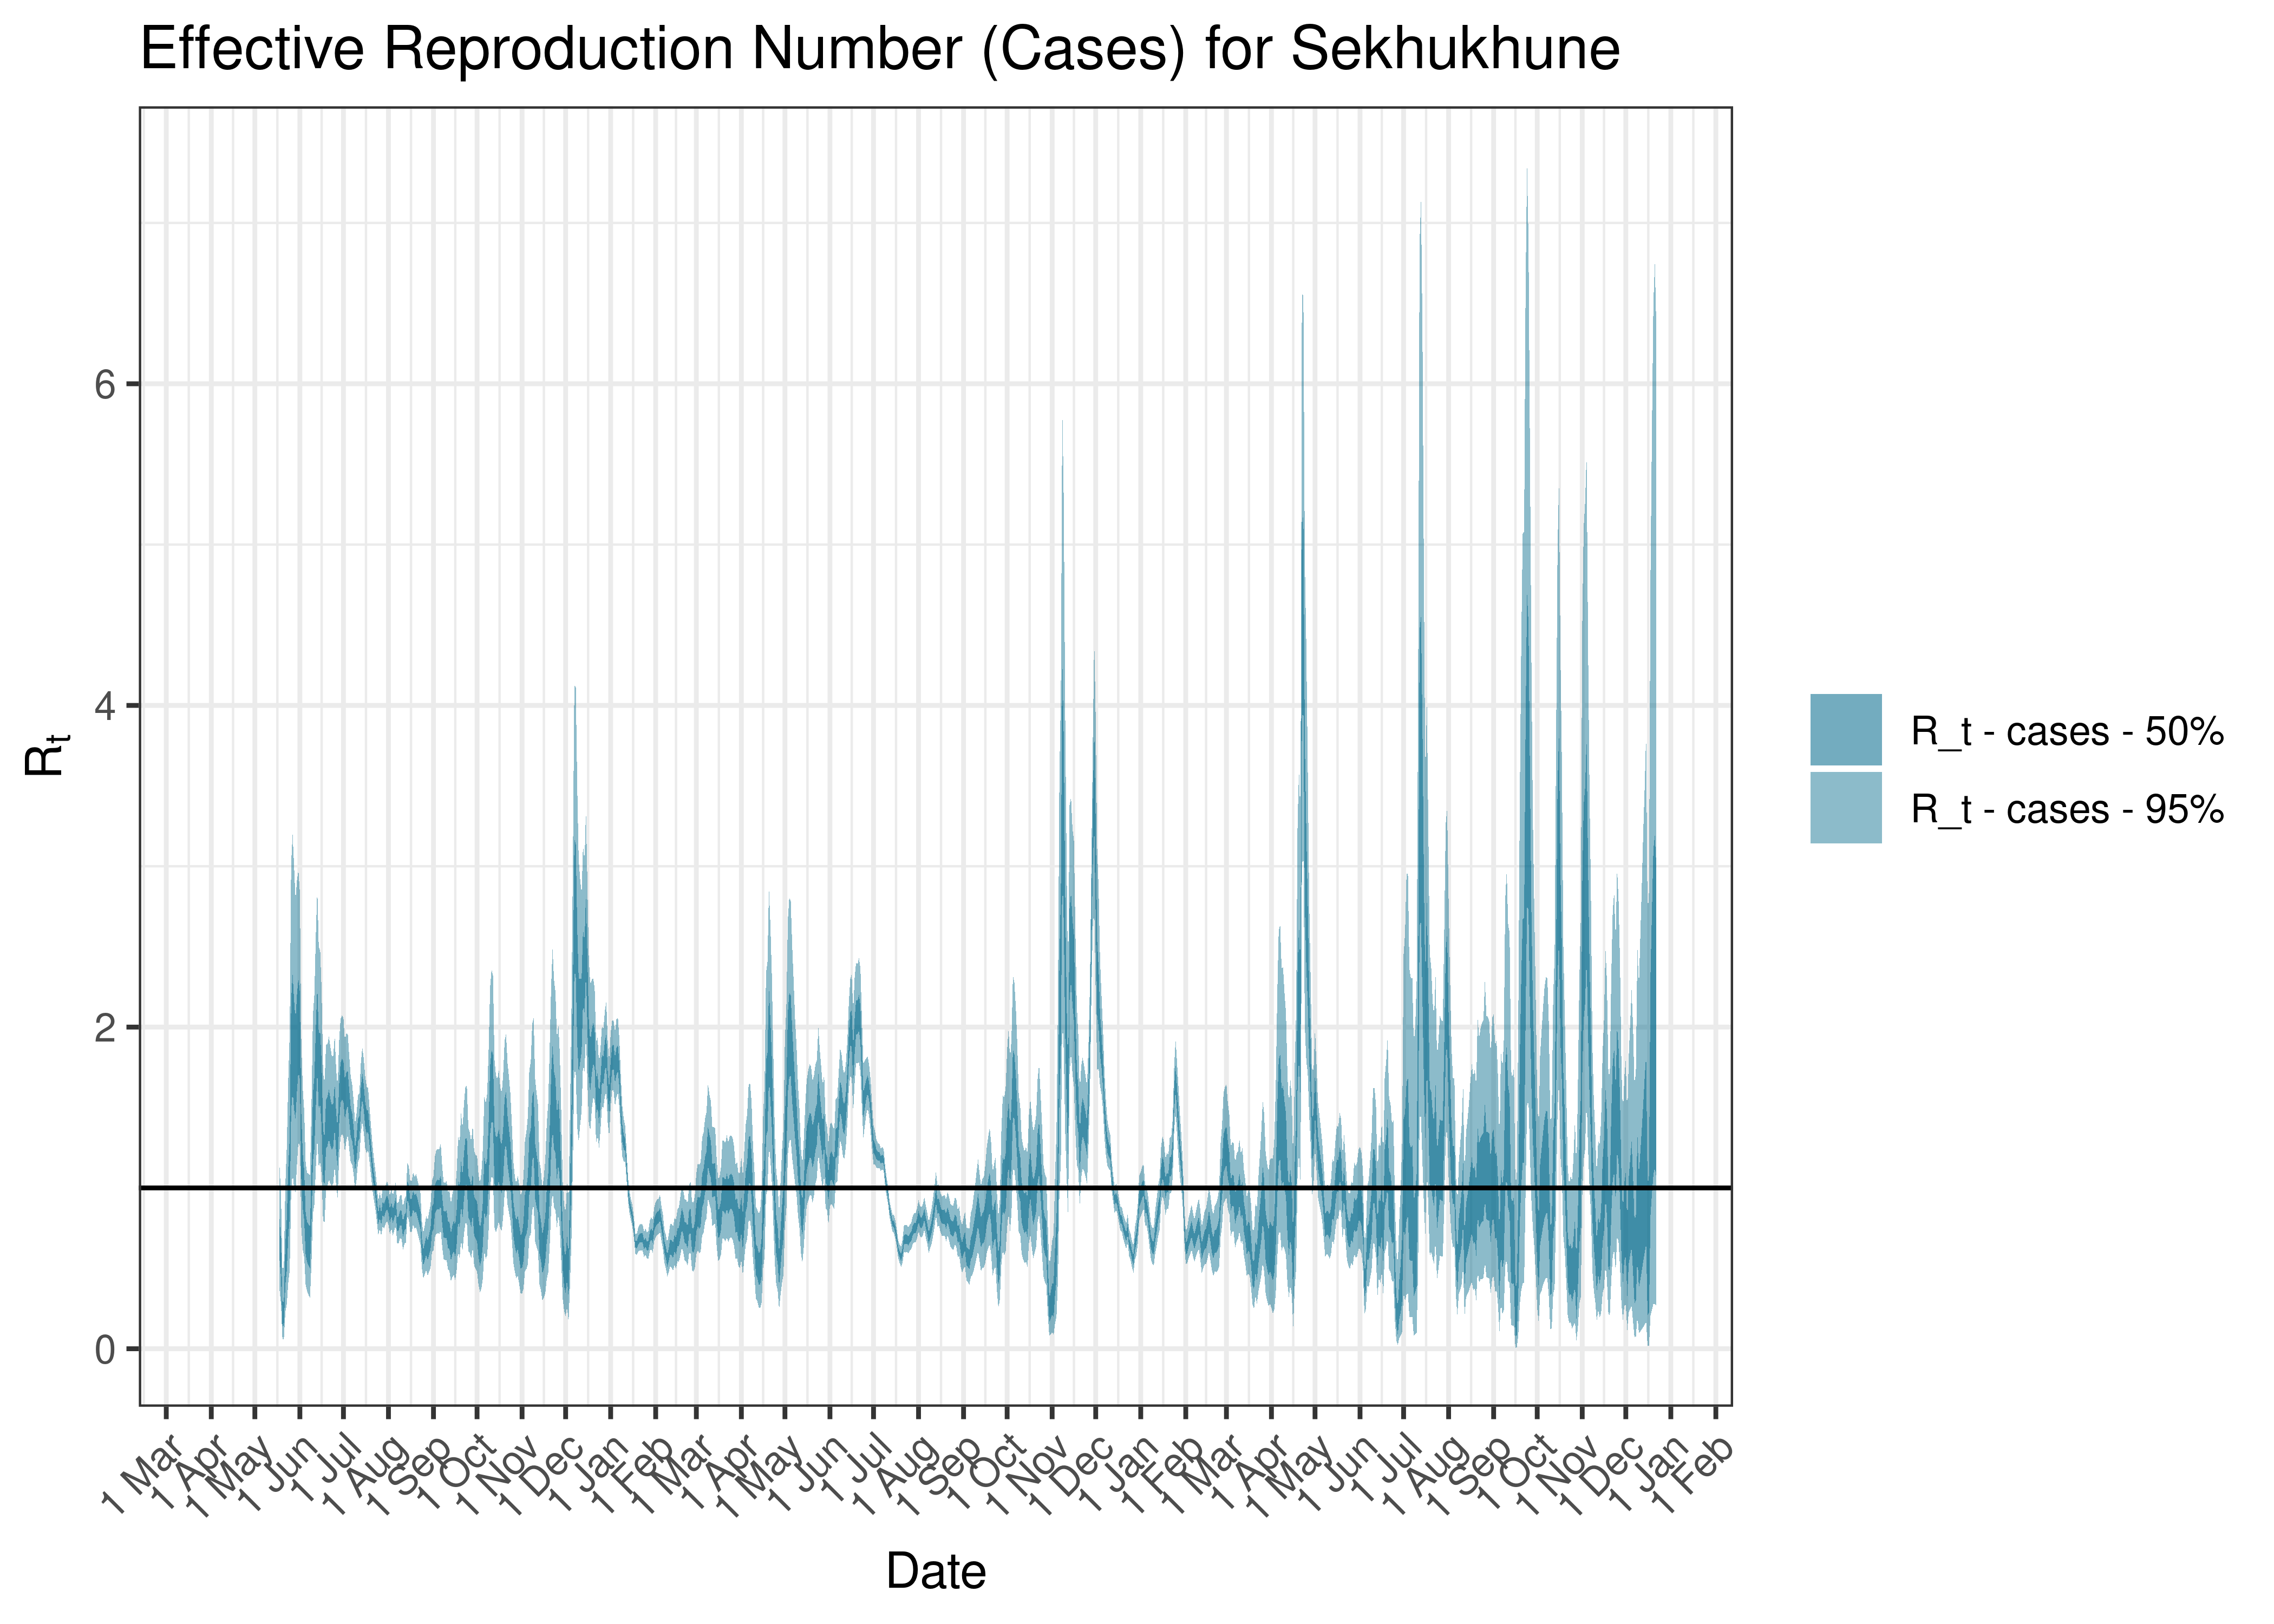 Estimated Effective Reproduction Number Based on Cases for Sekhukhune since 1 April 2020